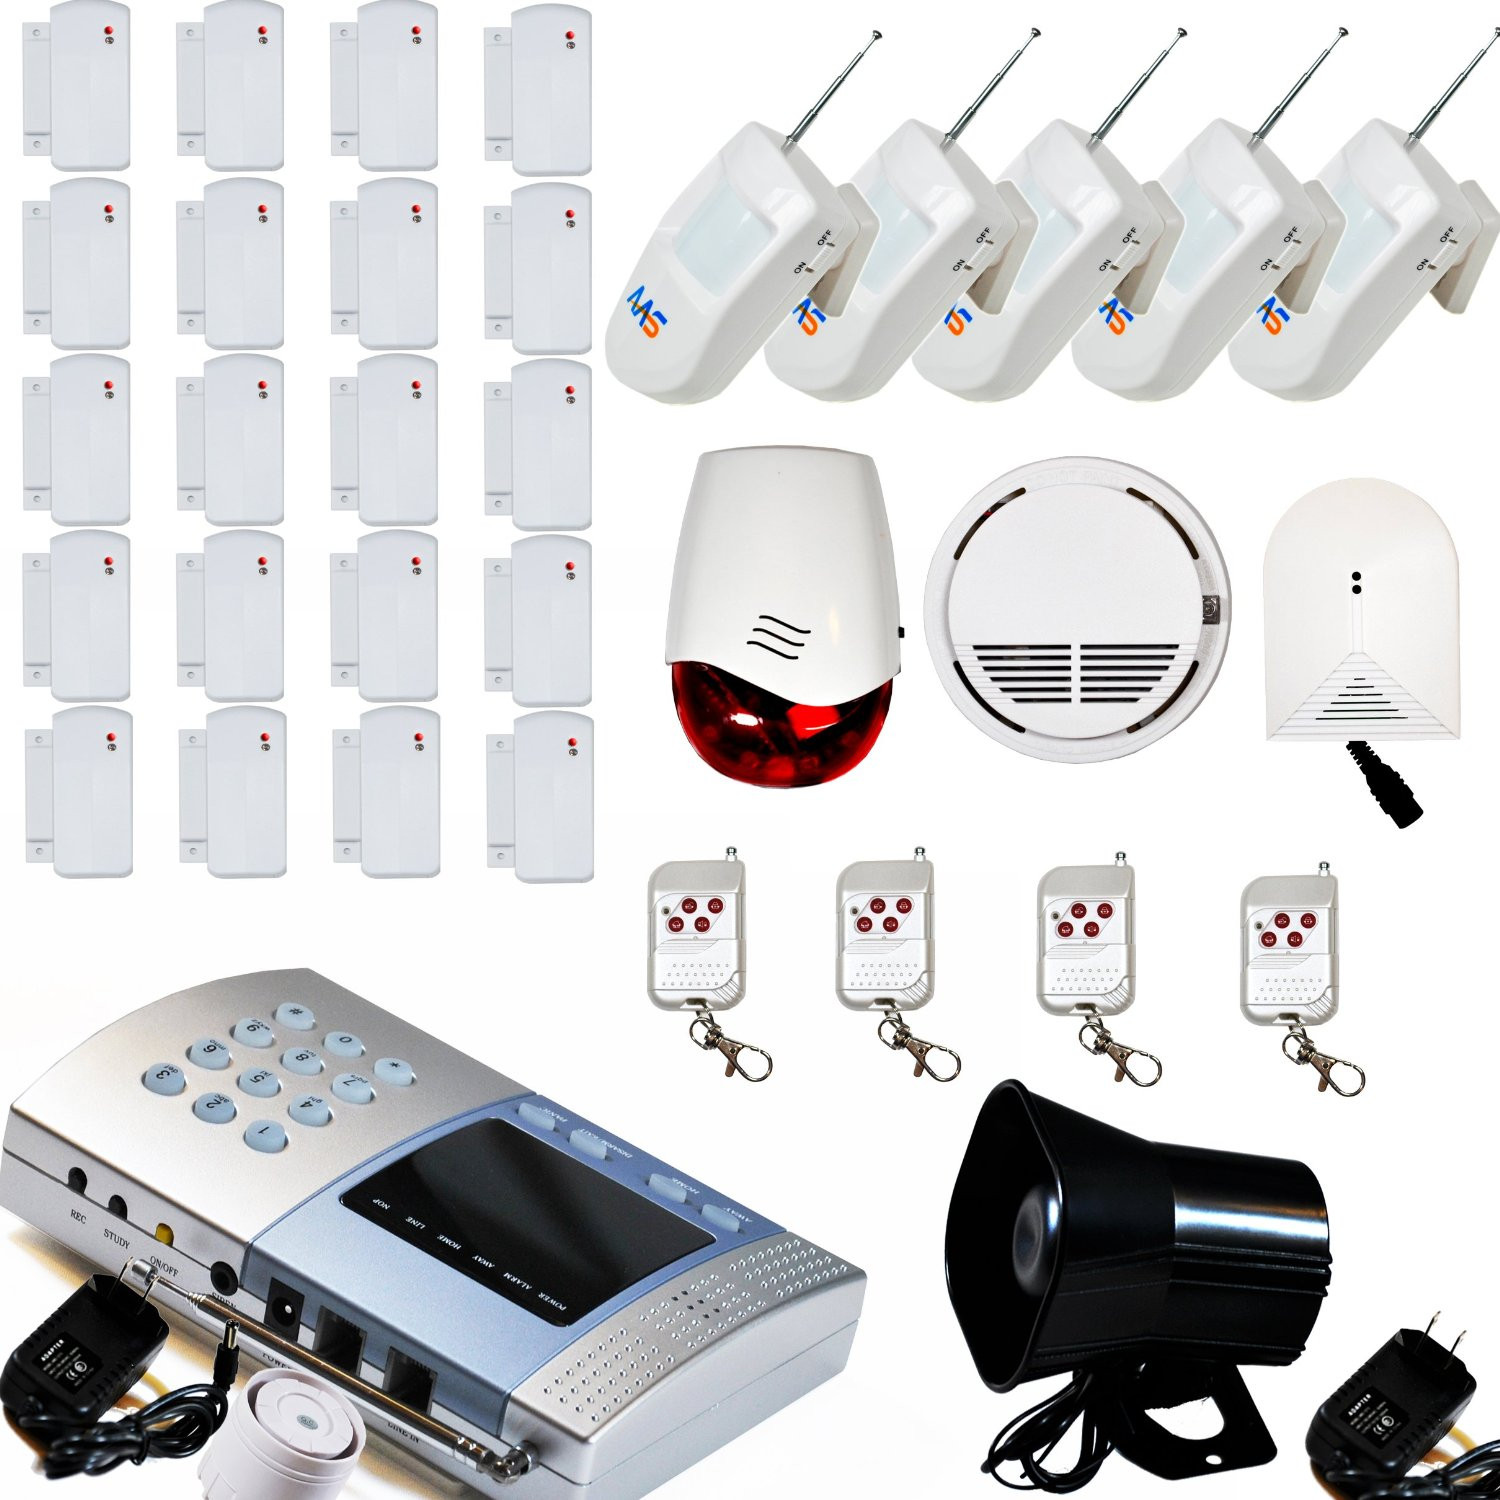 DIY Home Security Review
 AAS V600 Wireless Home Security Alarm System Kit DIY